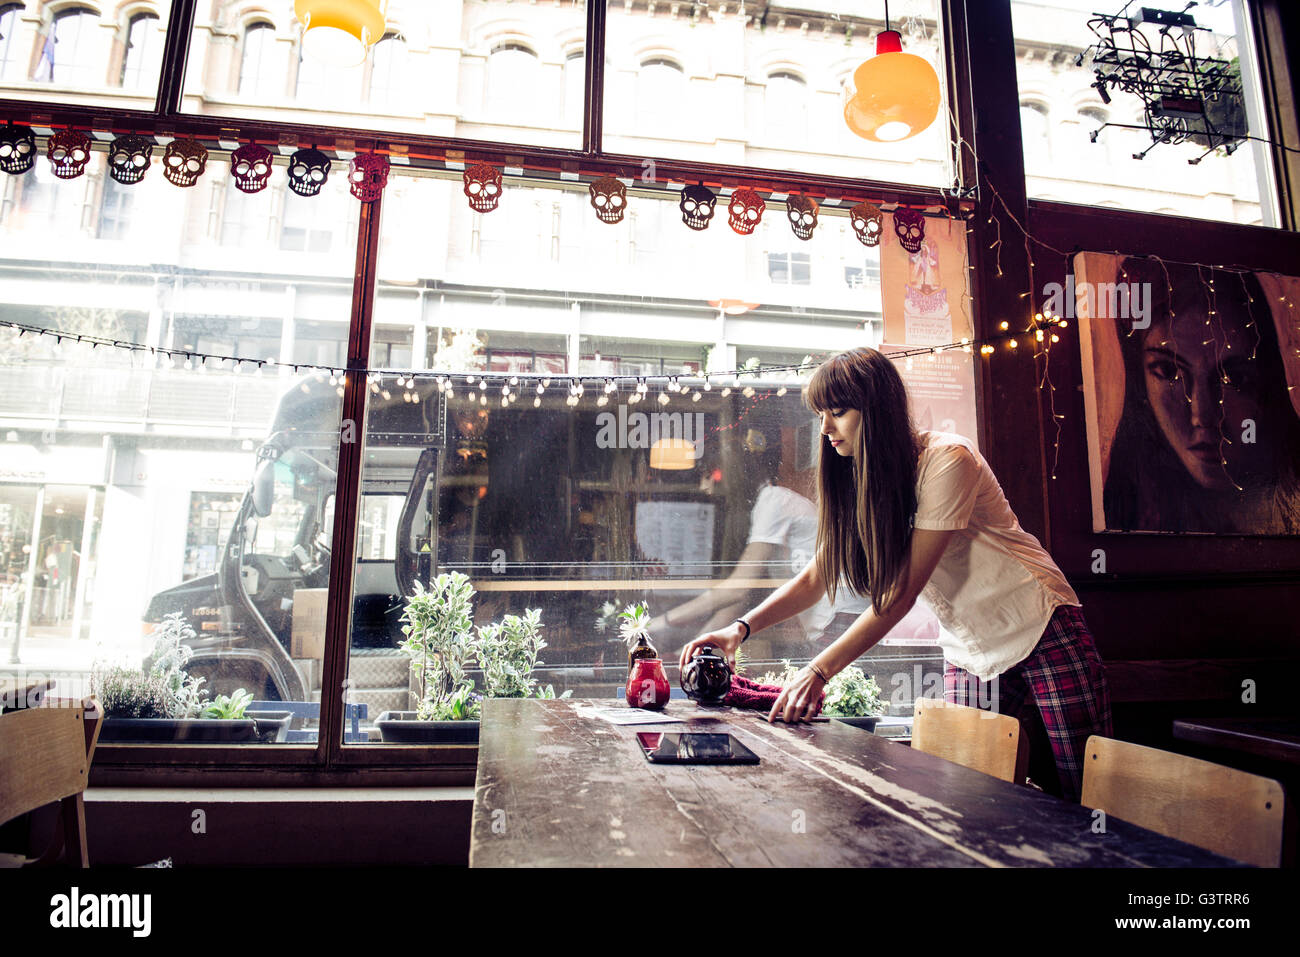 A young woman clearing a table in a coffee shop in Manchester. Stock Photo